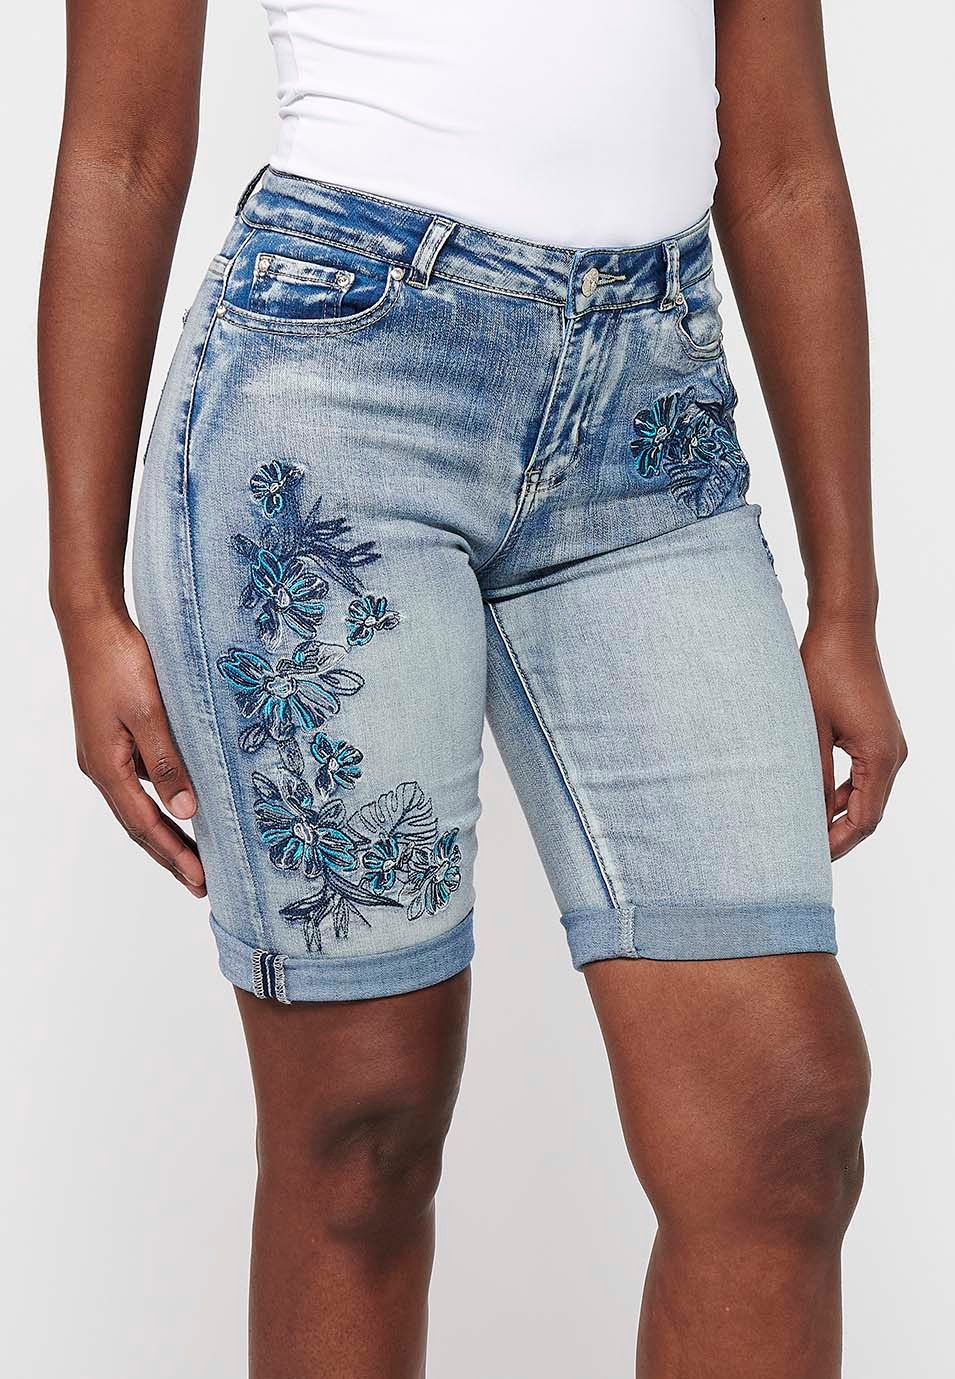 Women's Light Blue Floral Embroidery Shorts